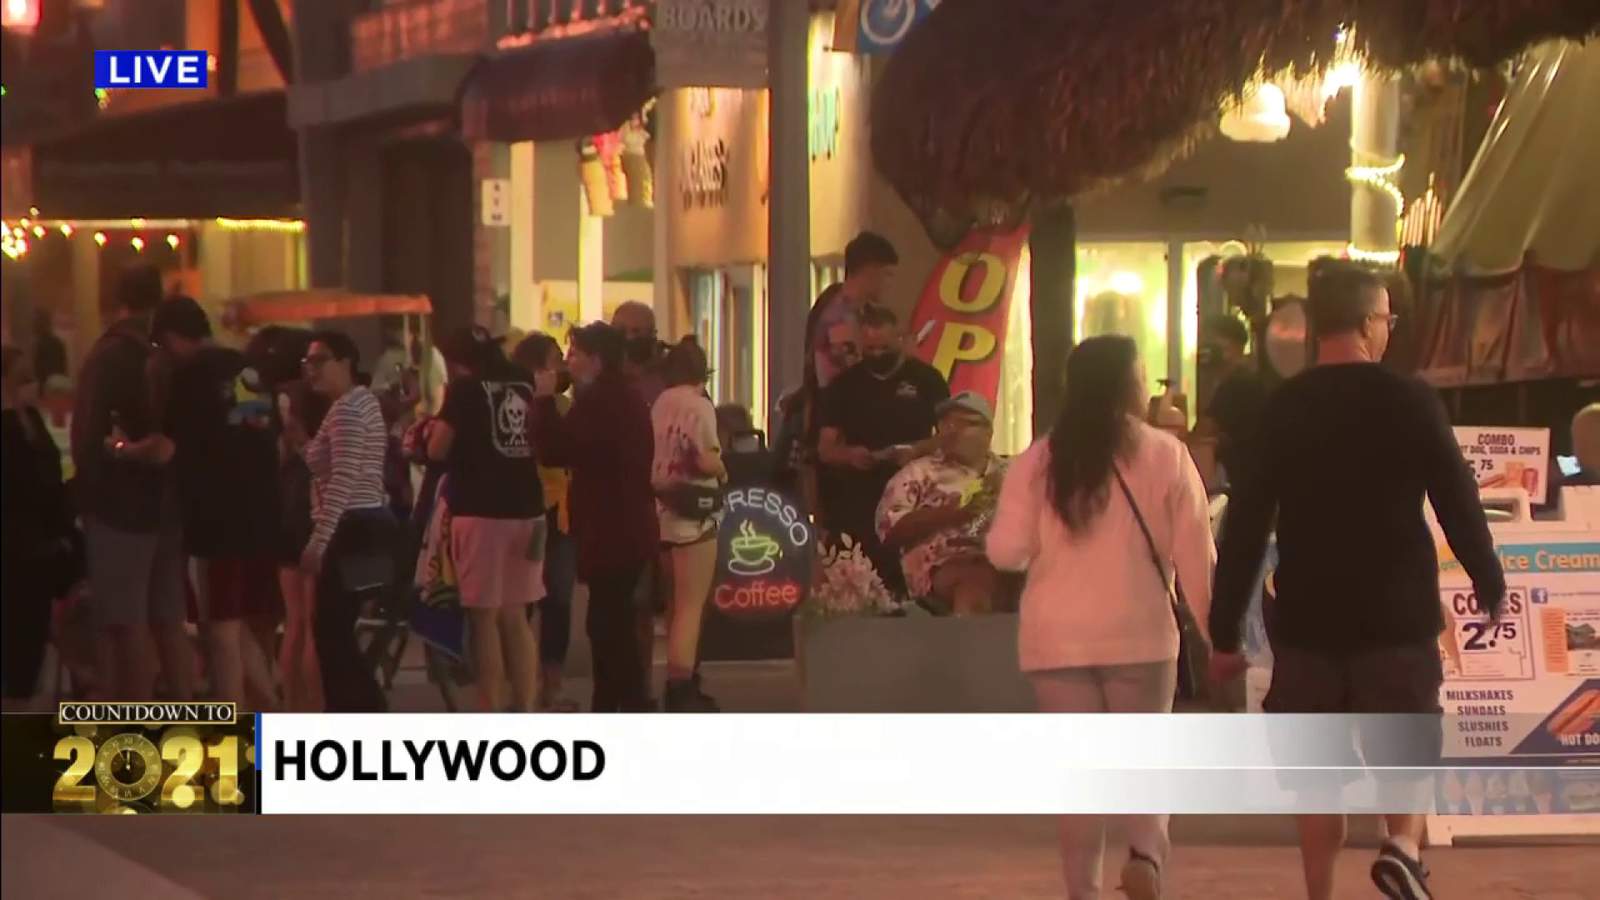 NYE revelers celebrate in less crowded Hollywood, Fort Lauderdale